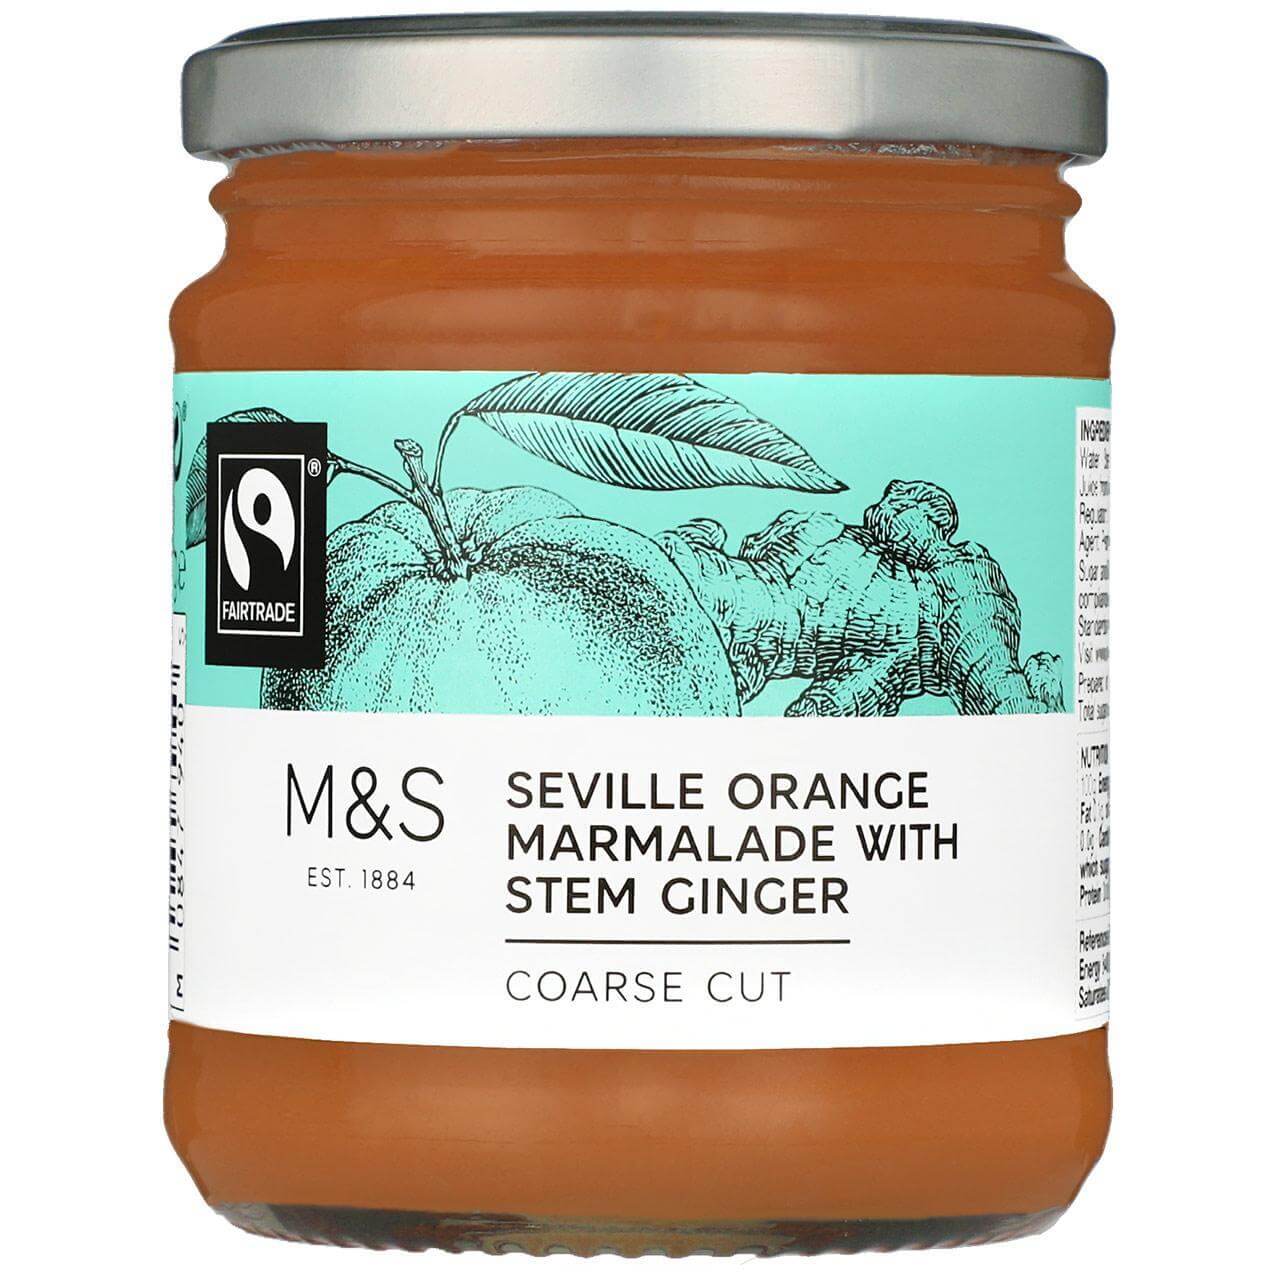 Image of M&S Marmalade made in the UK by Marks & Spencer Food. Buying this product supports a UK business, jobs and the local community